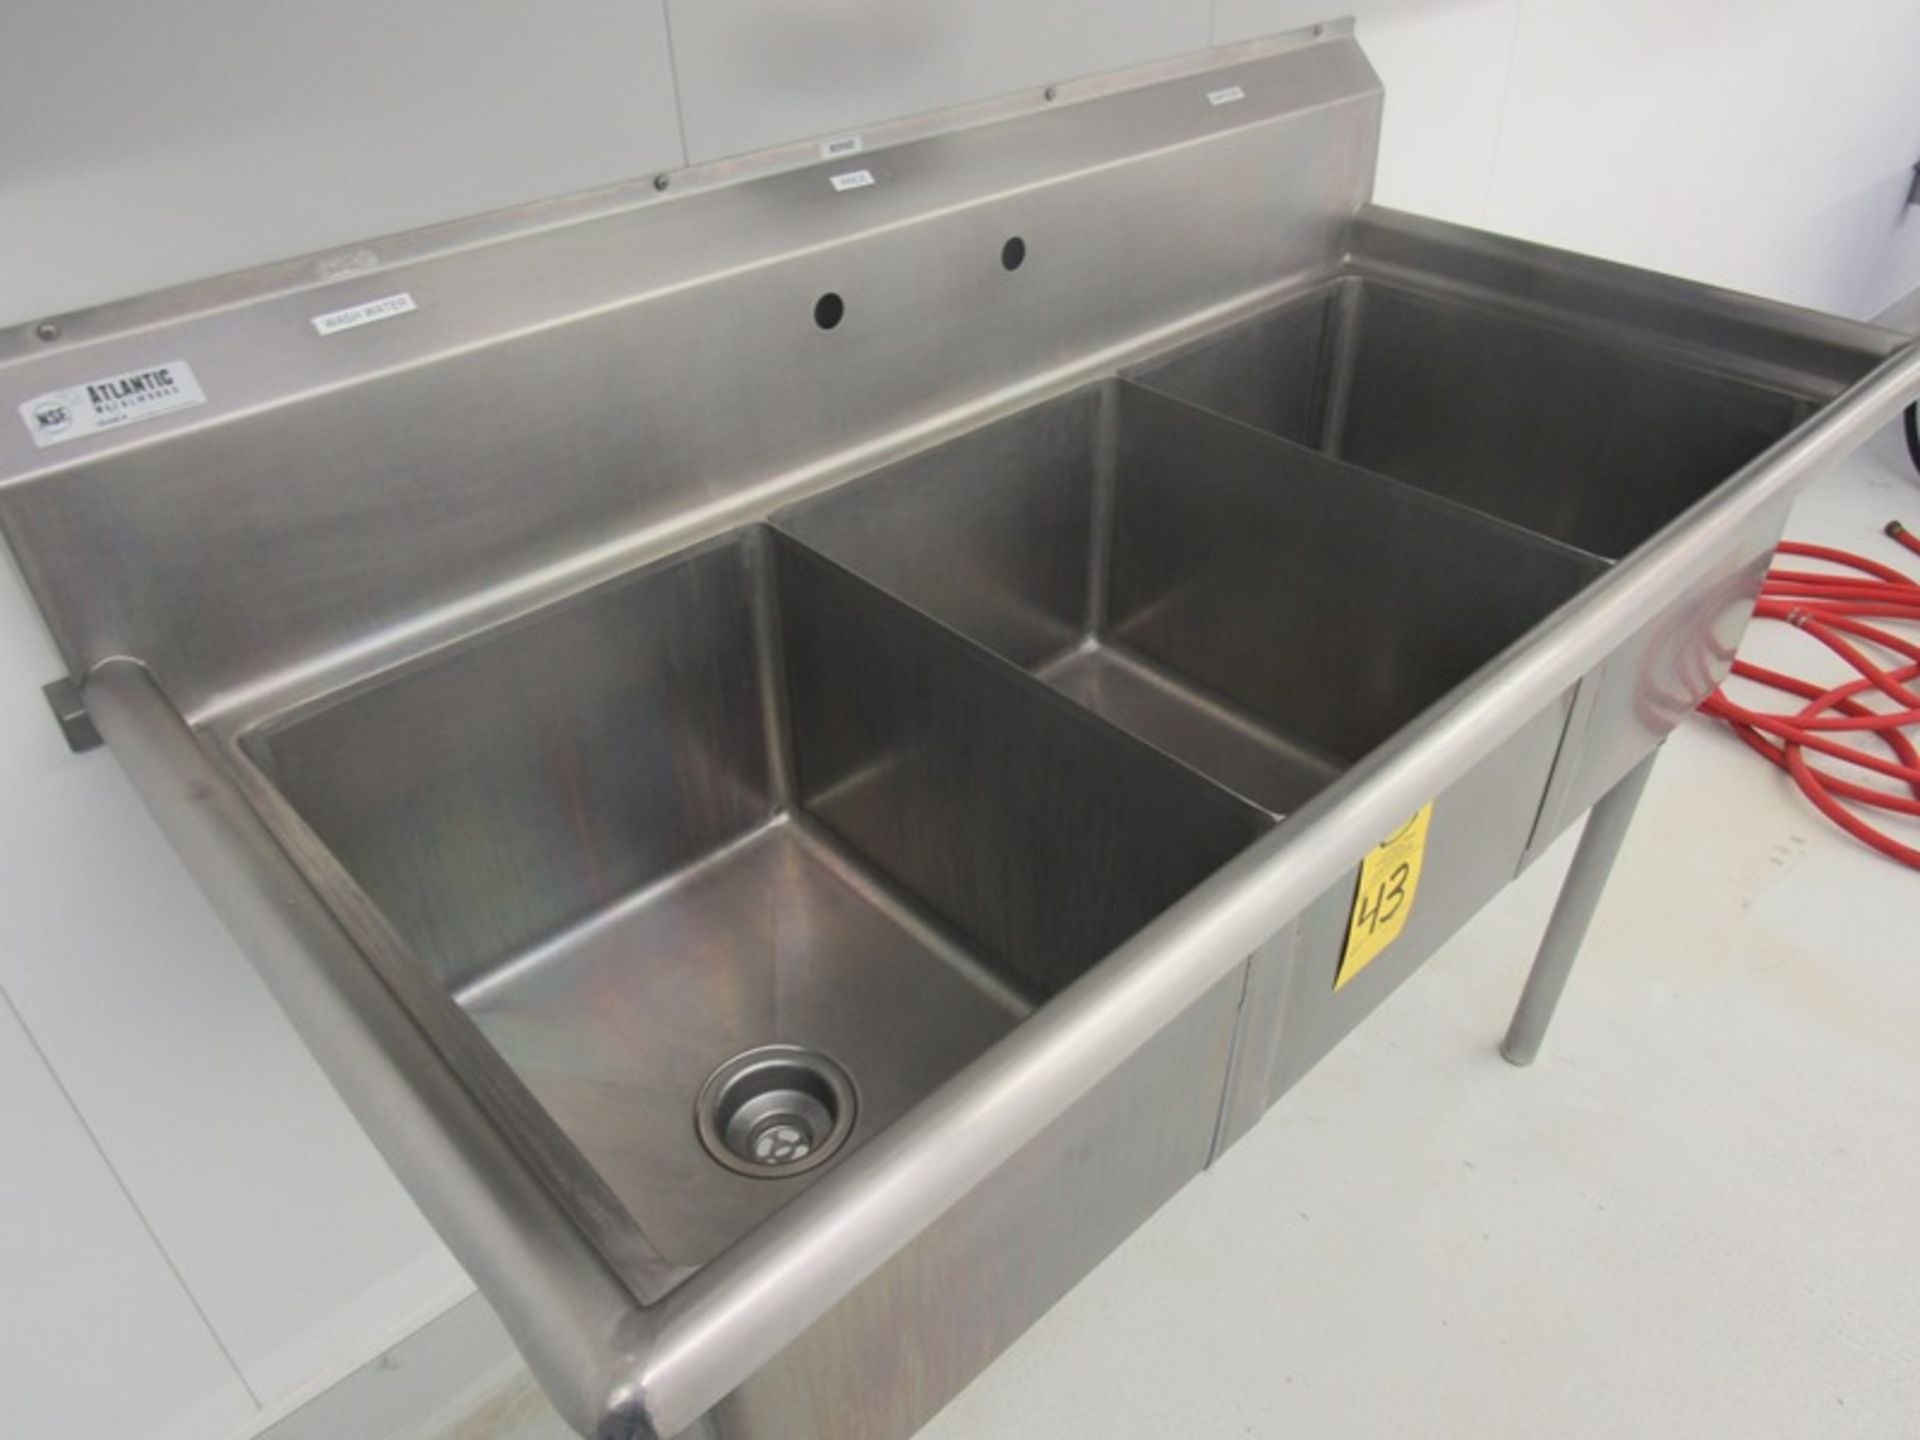 Lot of Stainless Steel Basin, 27" W X 54" L X 12" D, 3 bays, (2) Stainless Steel Shelves 12" W X - Image 2 of 2